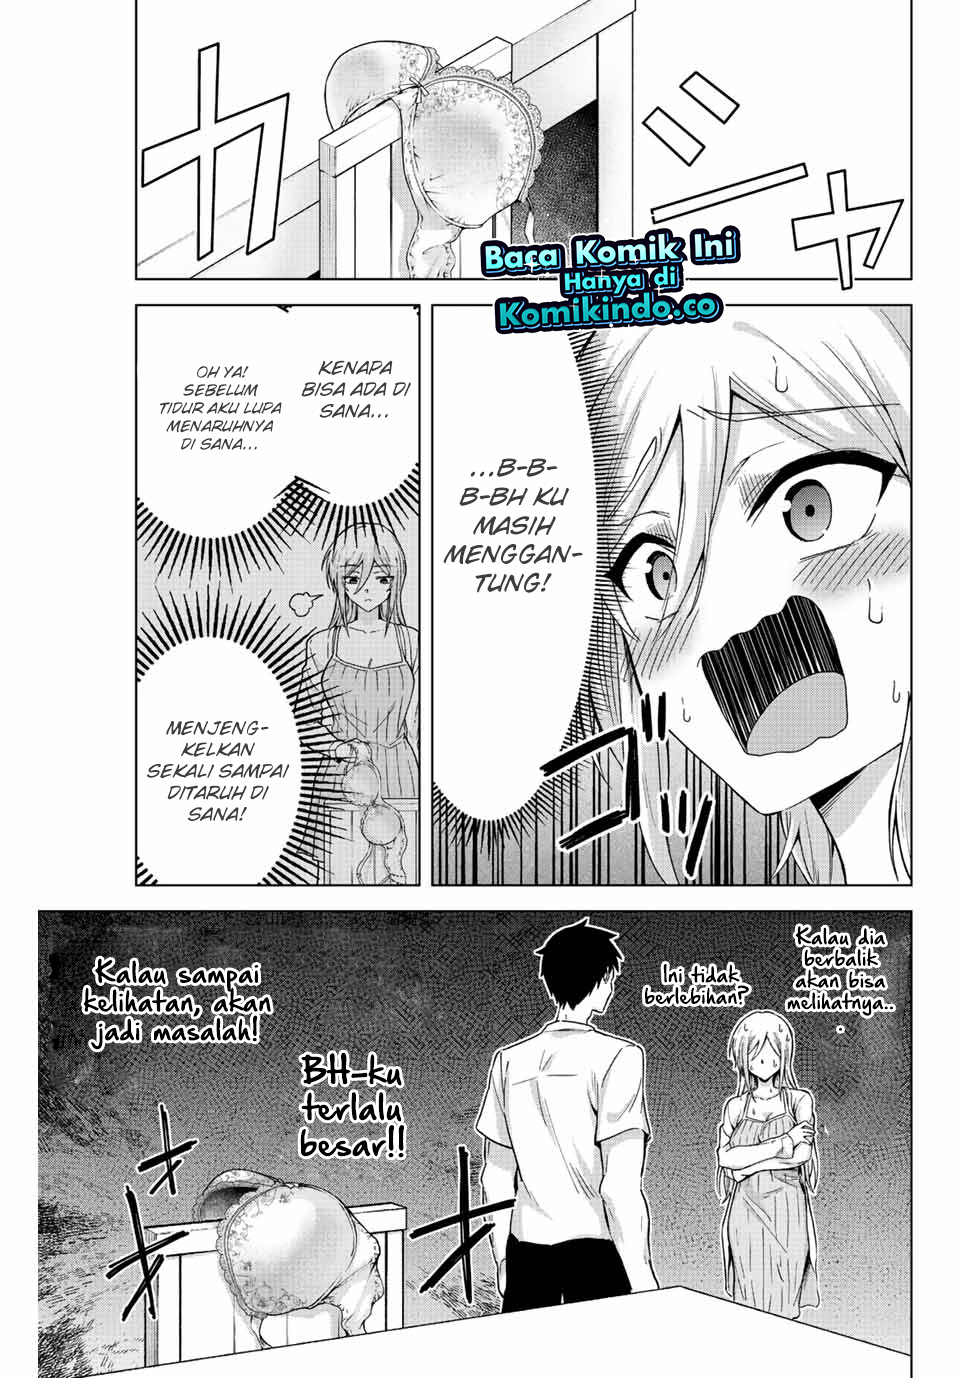 The Death Game Is All That Saotome-san Has Left Chapter 23